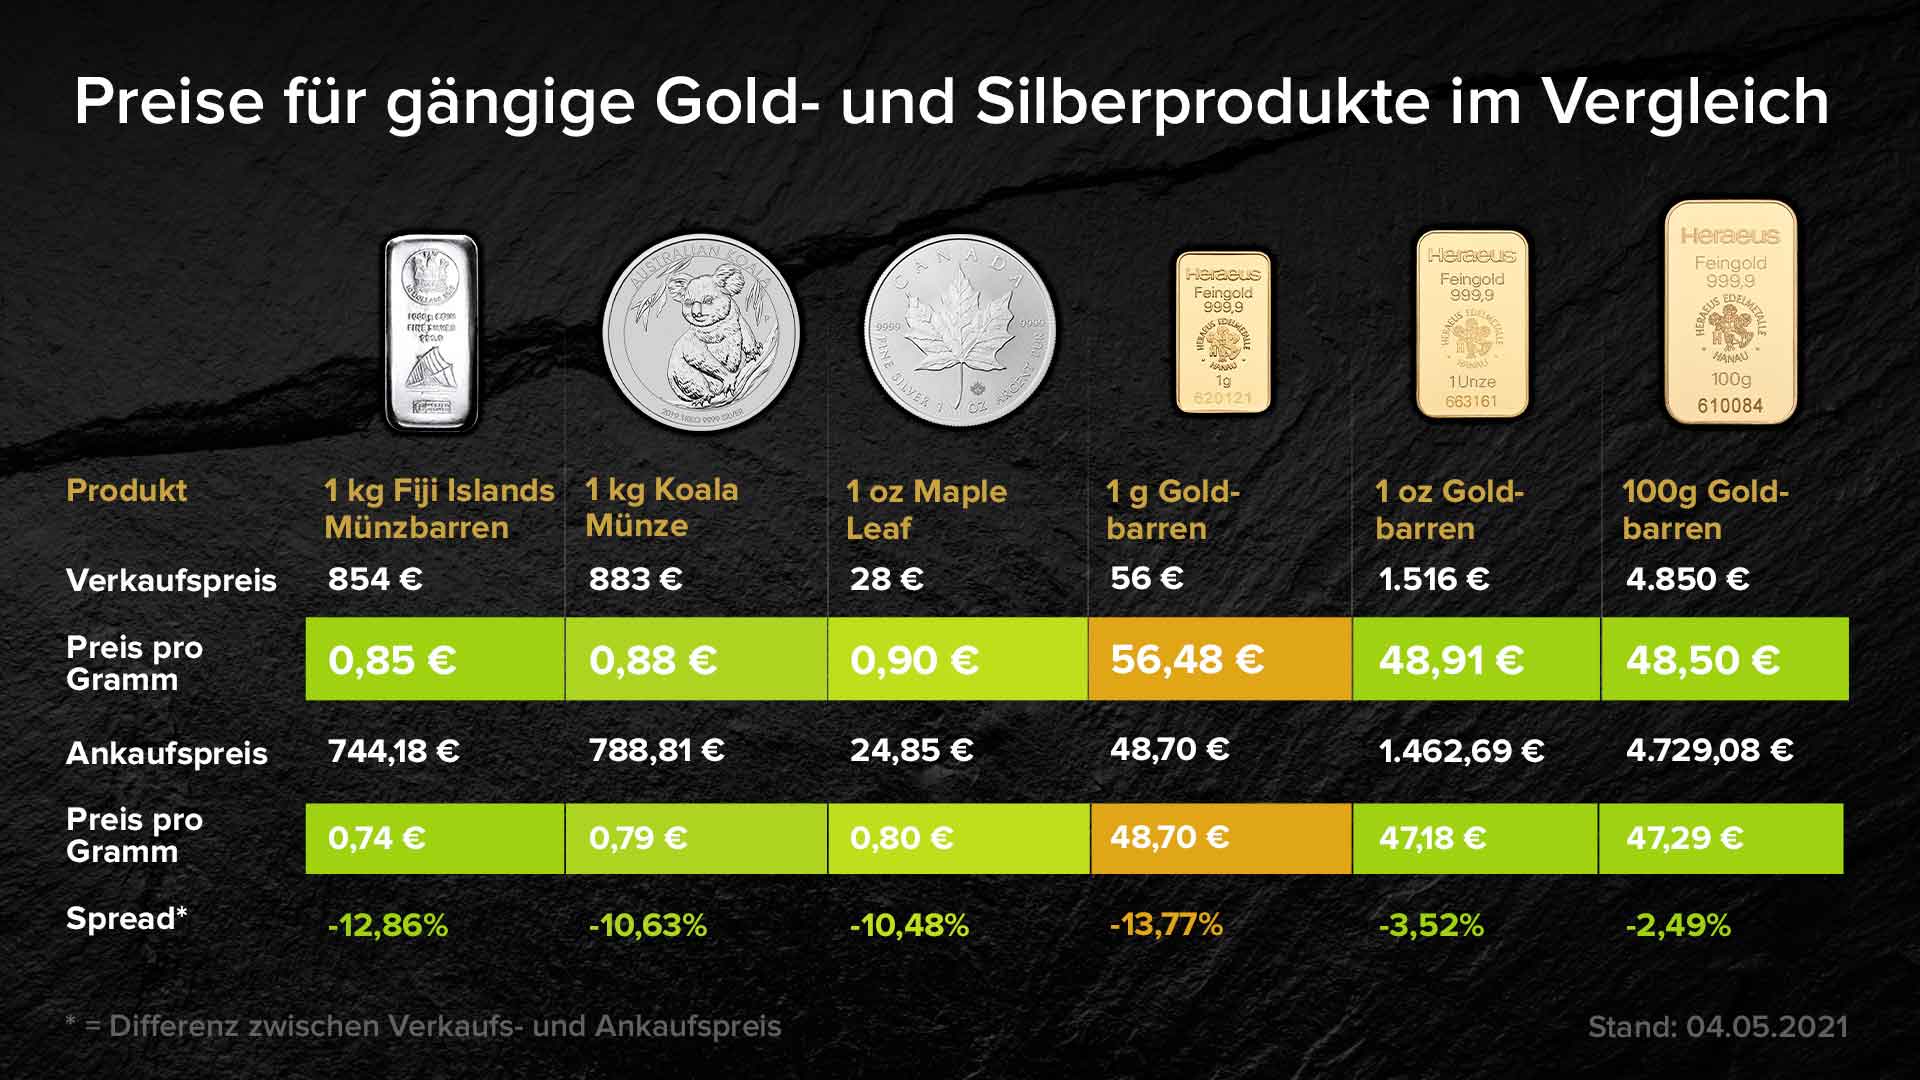 Prices for common gold and silver products in comparison